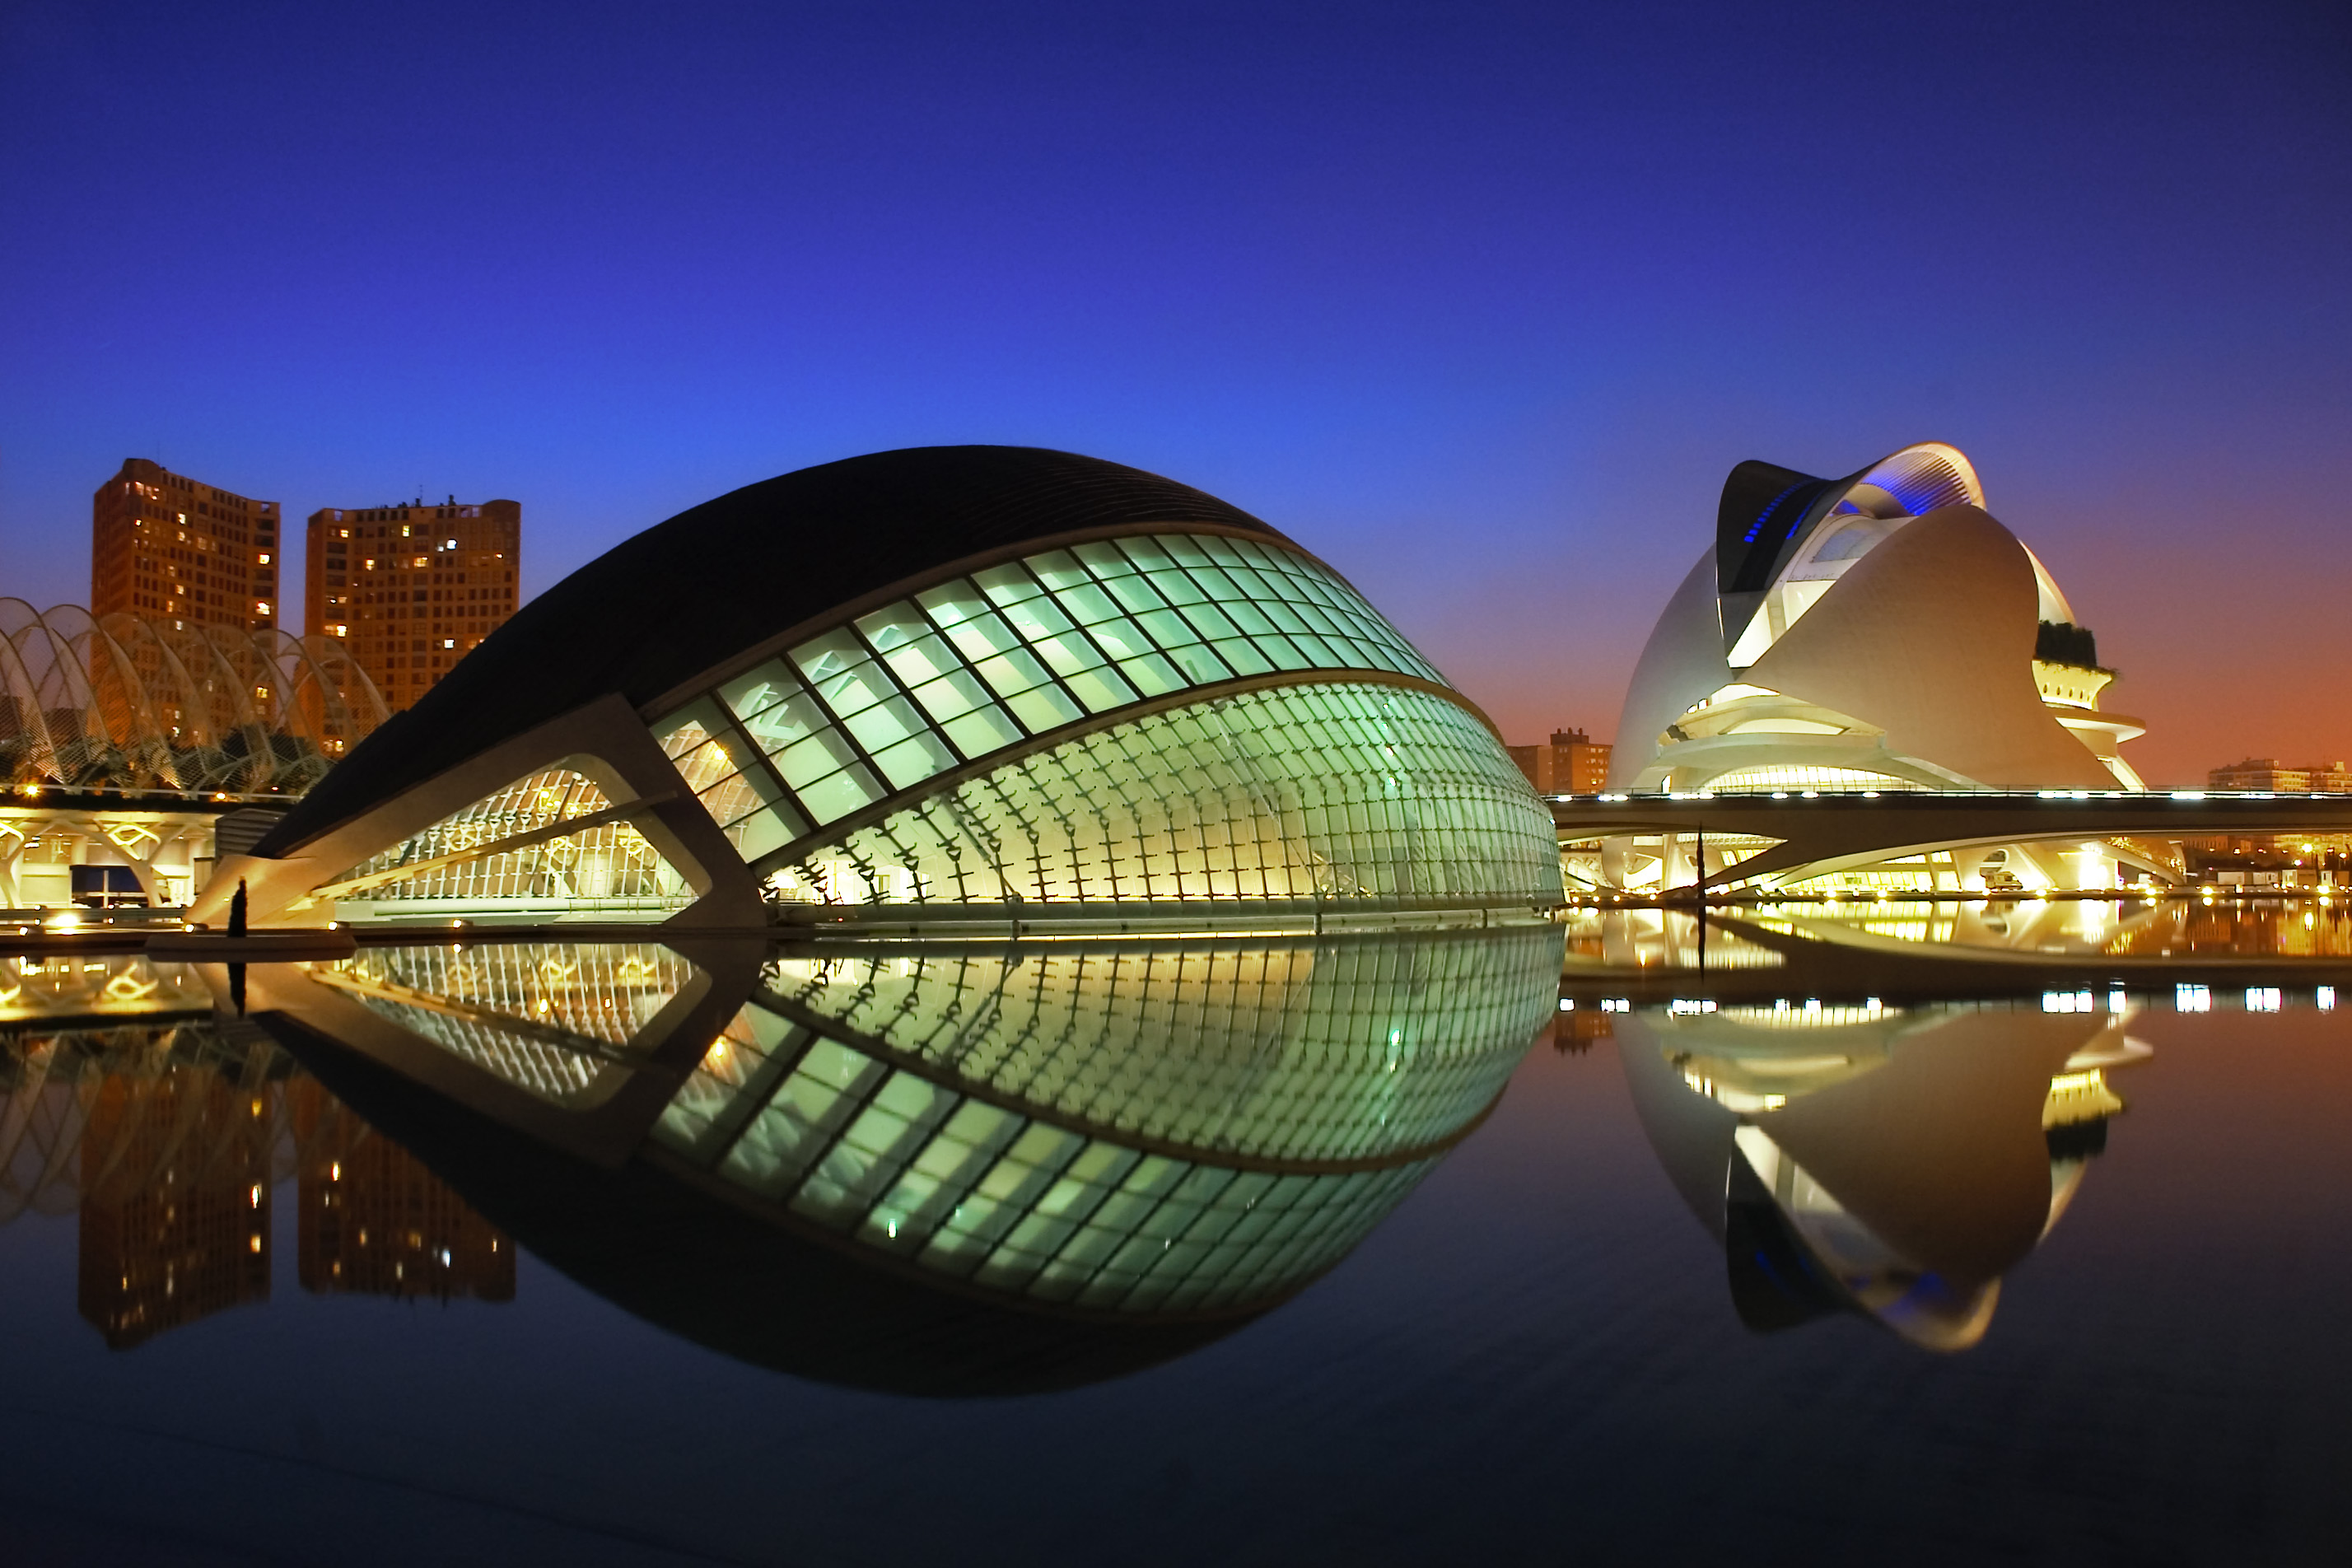 Nice Images Collection: City Of Arts And Sciences Desktop Wallpapers